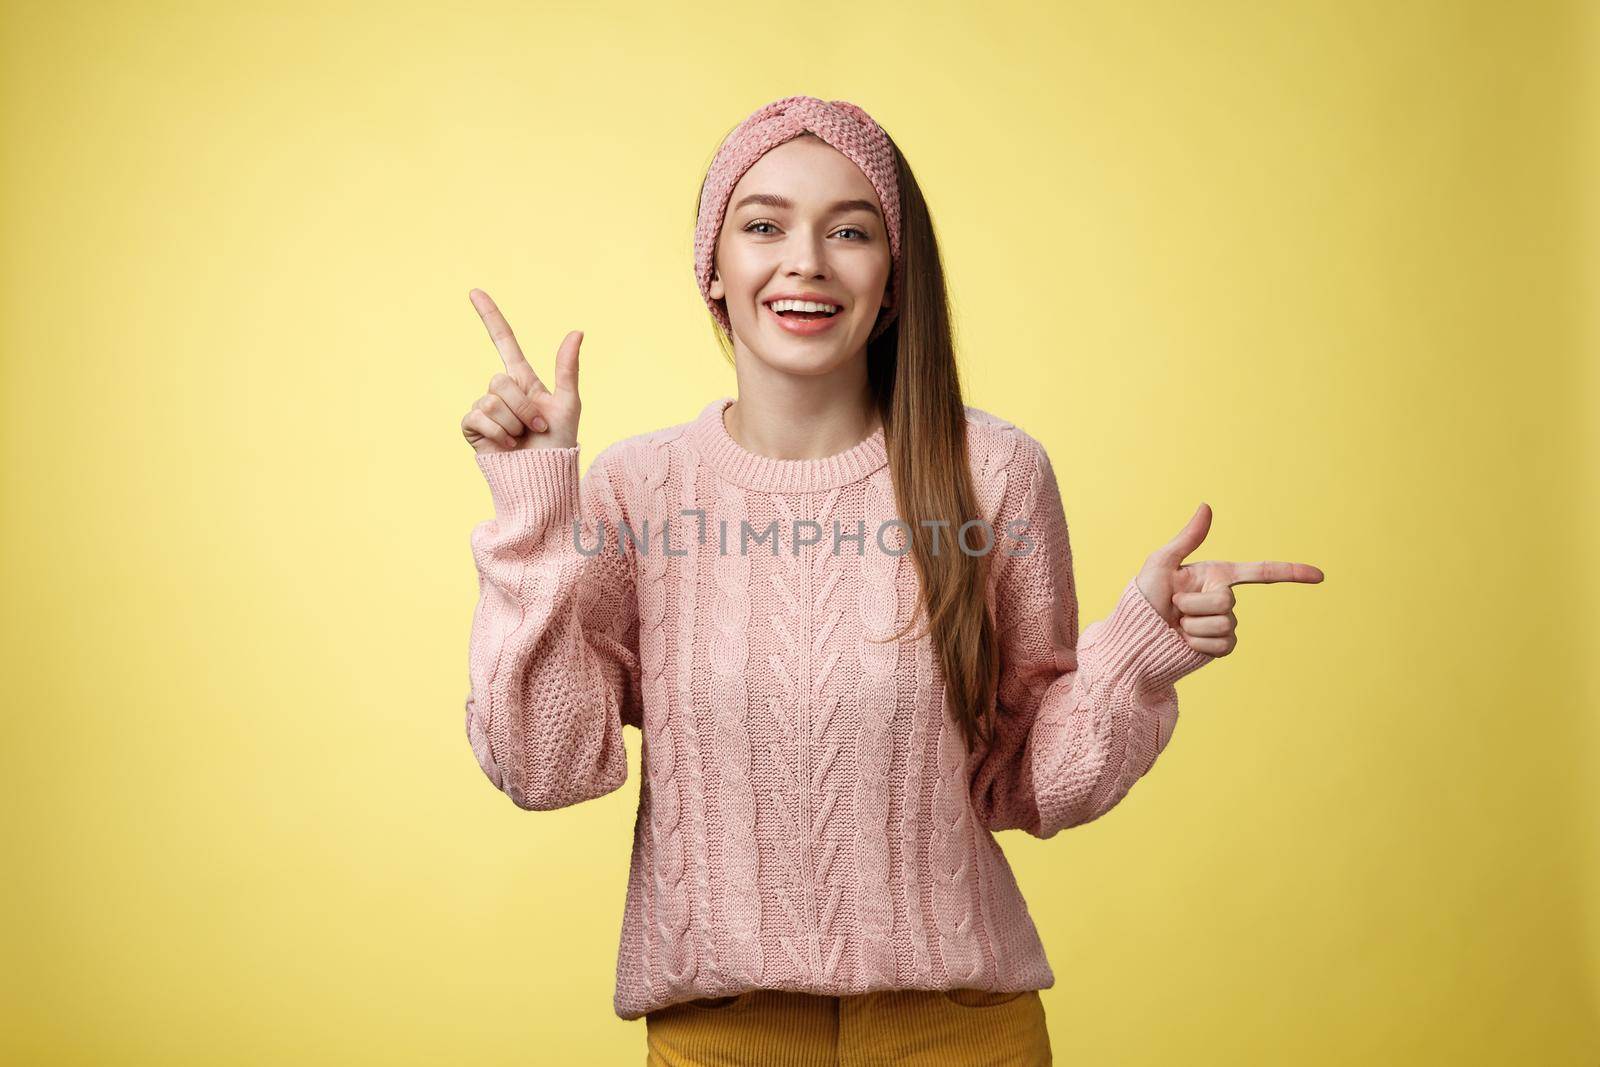 Pick what want. Charismatic cheerful young female student in headband, sweater pointing up, indicating right smiling cute, promoting advertisement showing opportunities and choices over white wall.